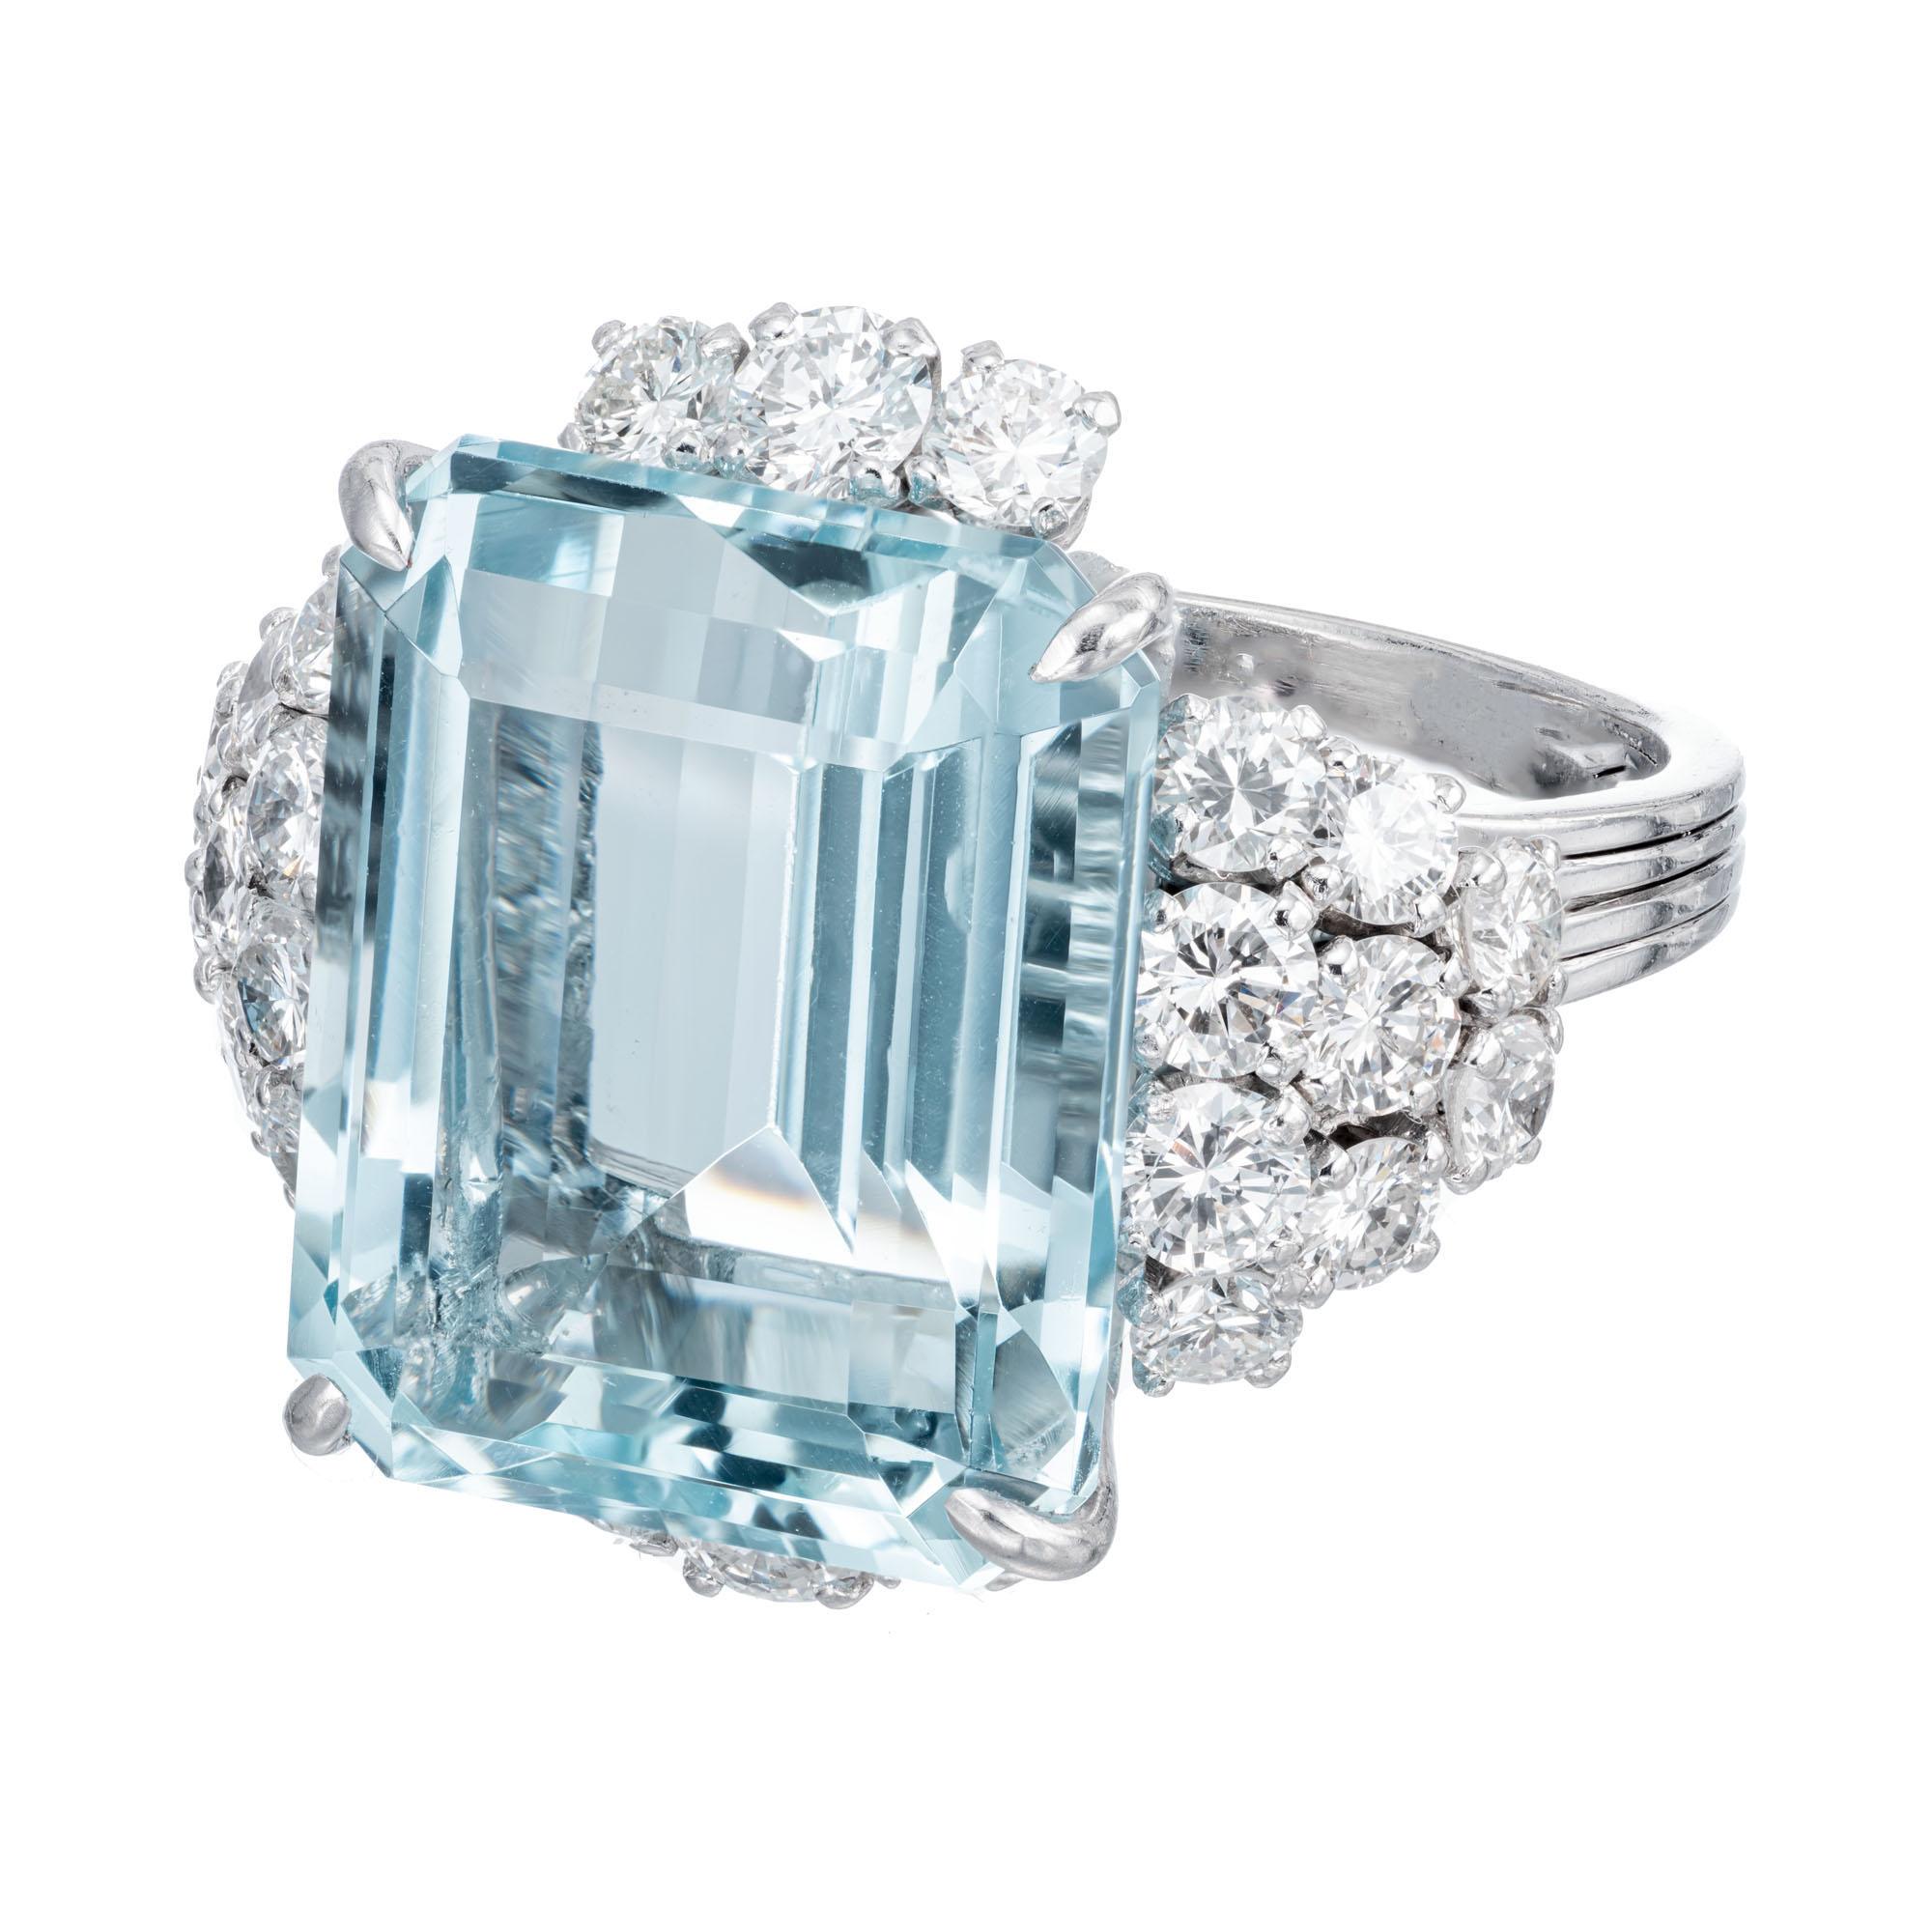 Natural top gem aqua 14.04 Carat emerald cut in a totally hand made French ring with extra sparkly high-quality diamonds. Circa 1950.

1 rectangular step cut greenish blue aquamarine VS, approx. 14.04cts
24 round brilliant cut diamonds F-G VS 
Size